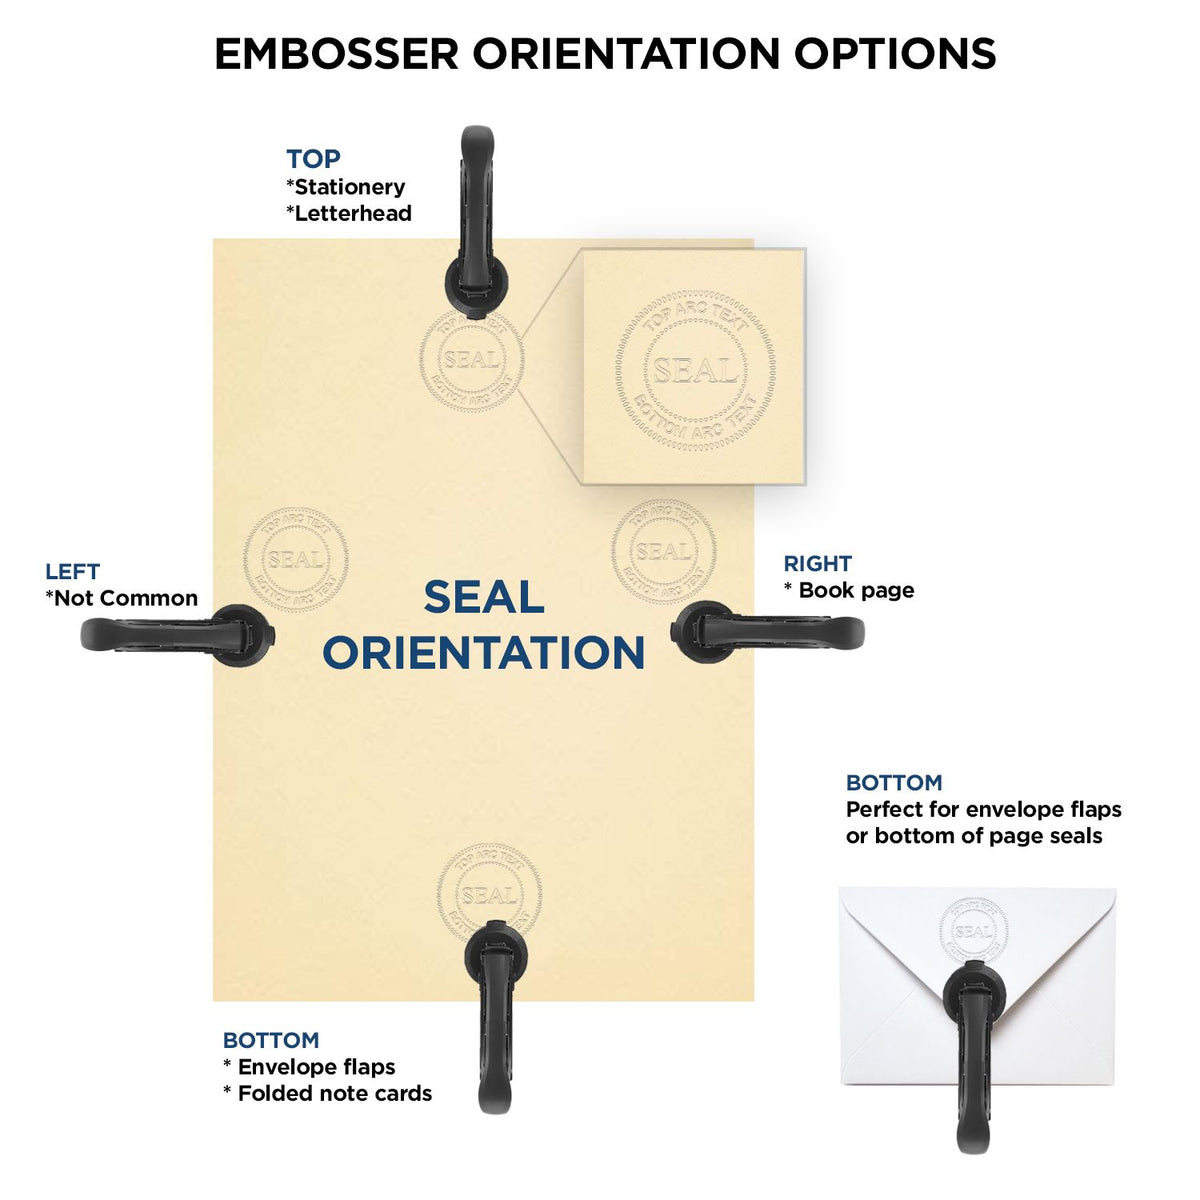 An infographic for the Gift Indiana Engineer Seal showing embosser orientation, this is showing examples of a top, bottom, right and left insert.